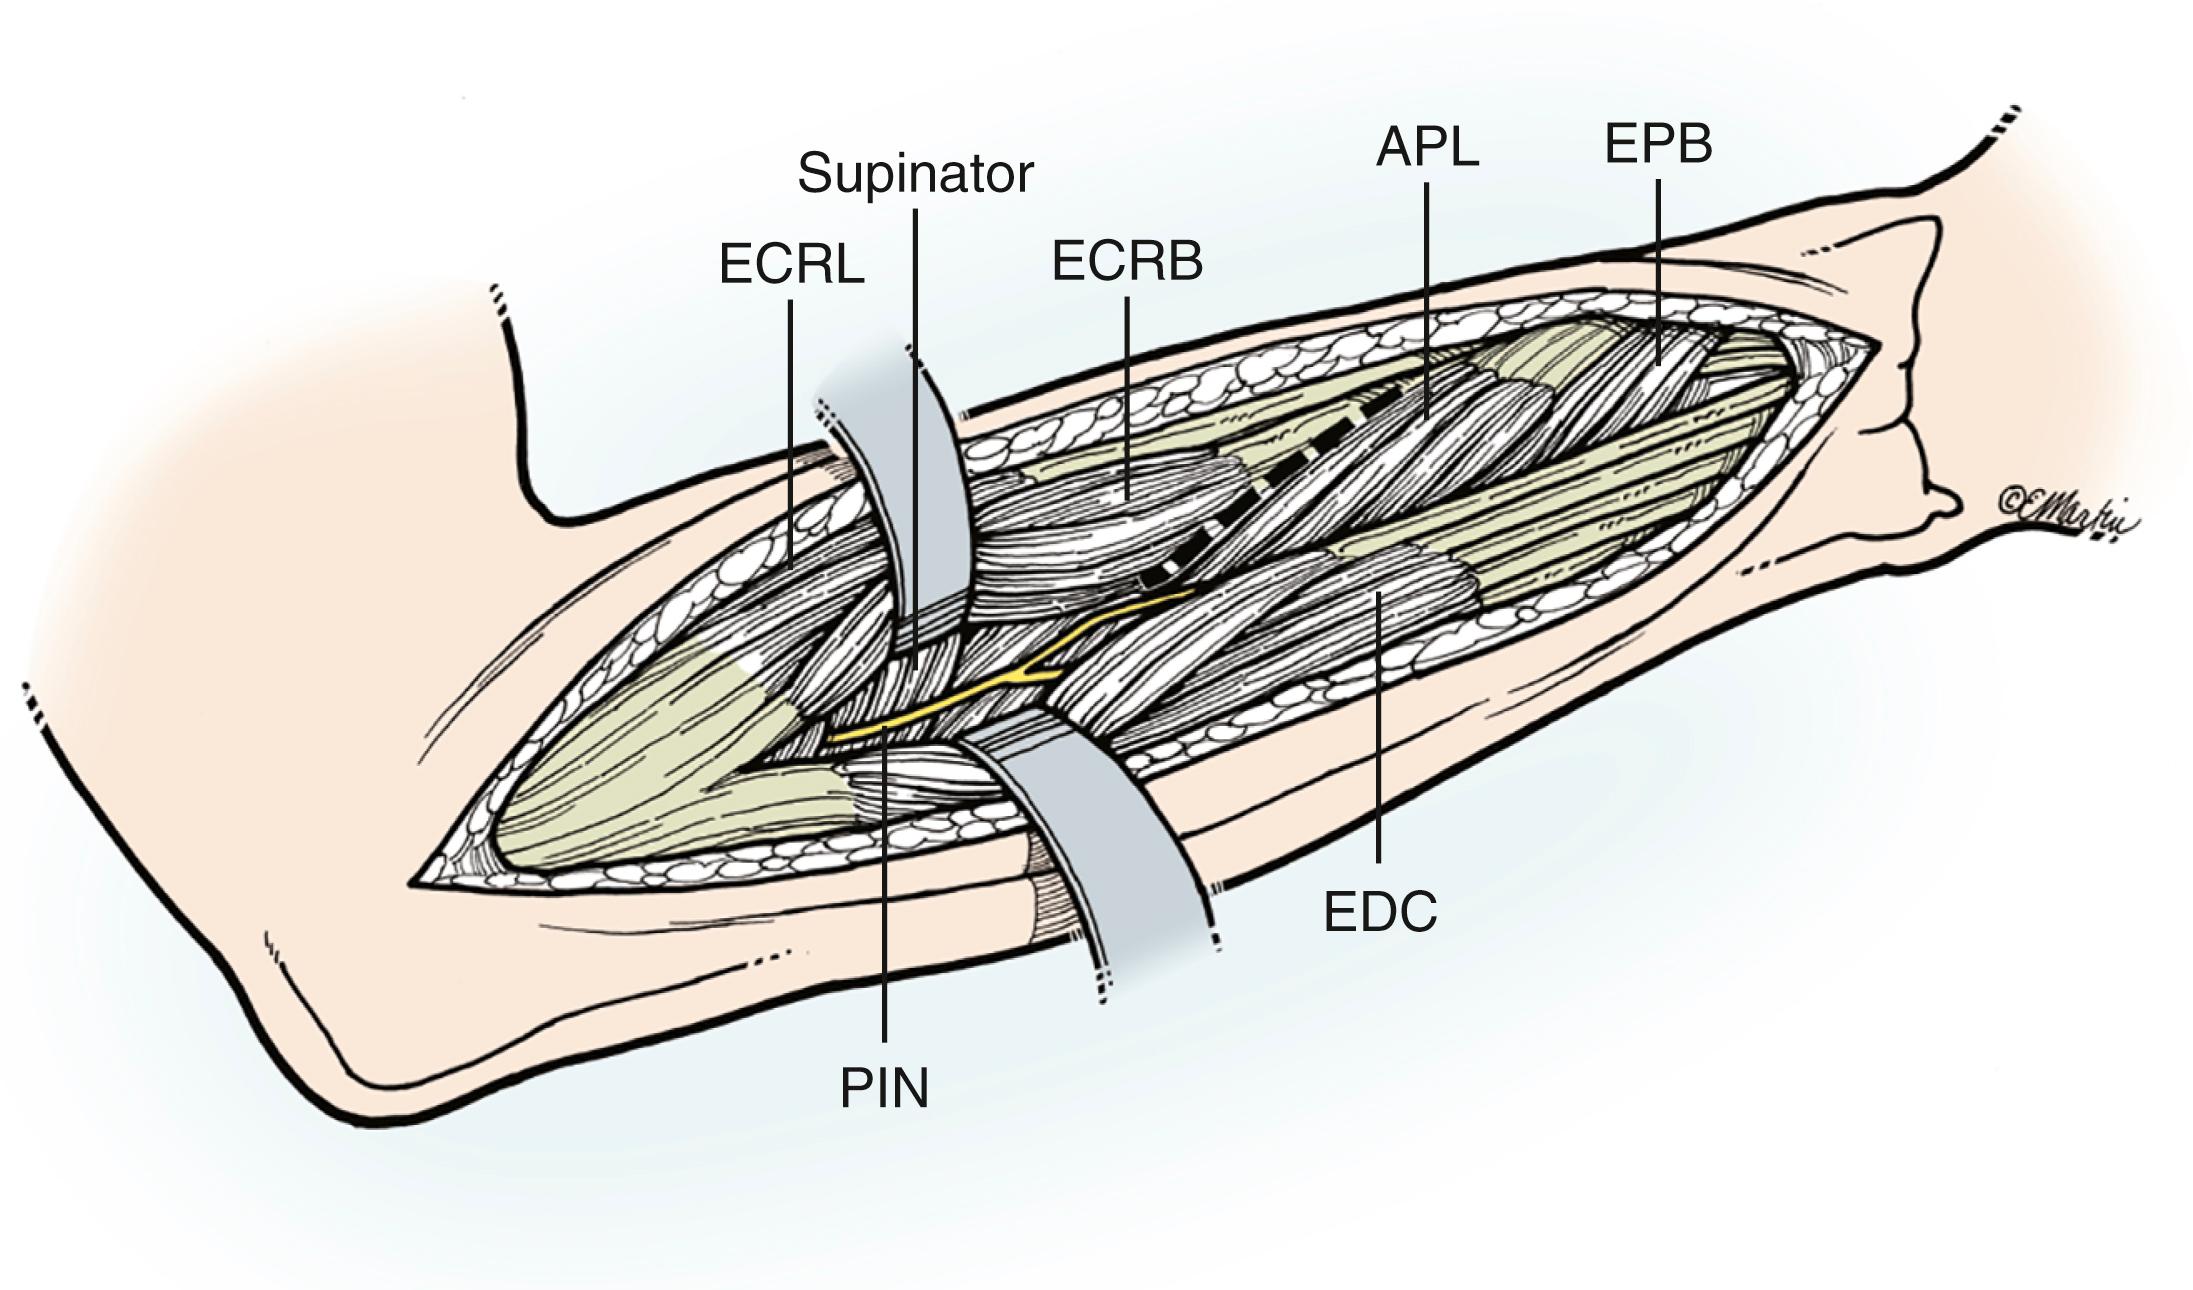 Fig. 21.13, Superficial muscular intervals for the Thompson posterior approach to the radial shaft. APL, Abductor pollicis longus; ECRB, extensor carpi radialis brevis; ECRL, extensor carpi radialis longus; EDC, extensor digitorum communis; EPB, extensor pollicis brevis; PIN, posterior interosseous nerve.